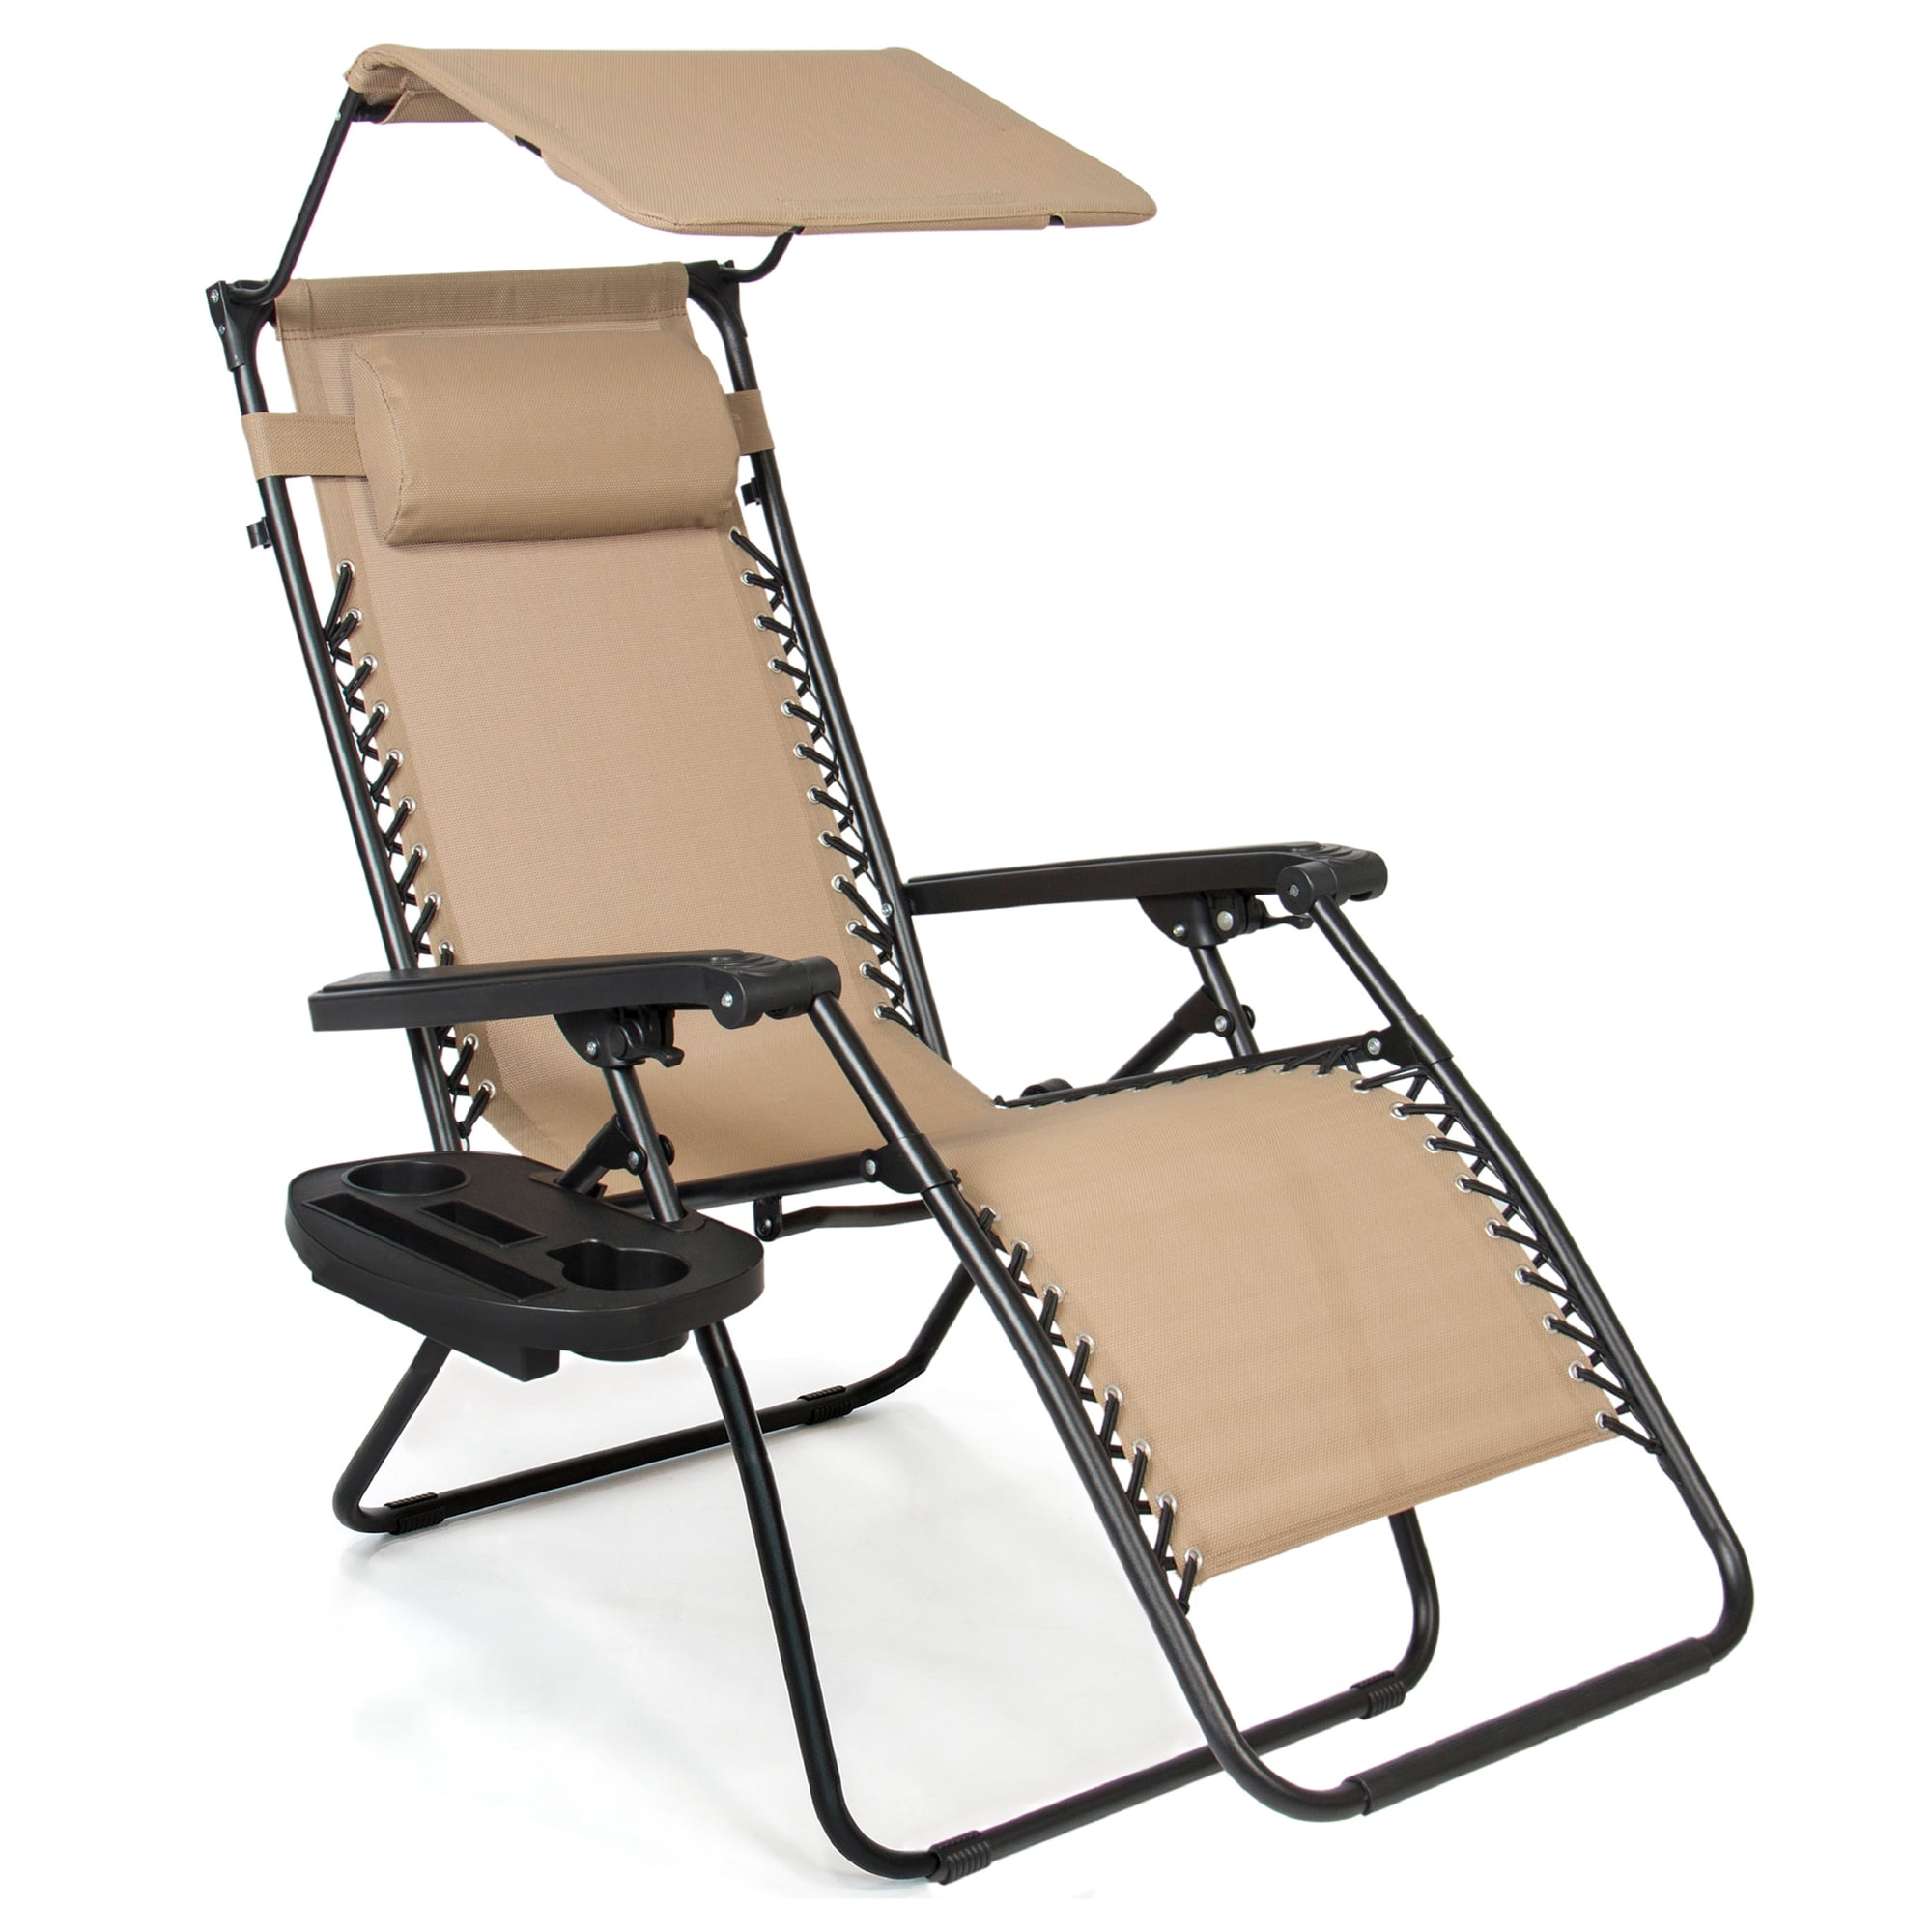 Folding Zero Gravity Reclining Lounge Chair With Cup Holder Tray And Headrest 